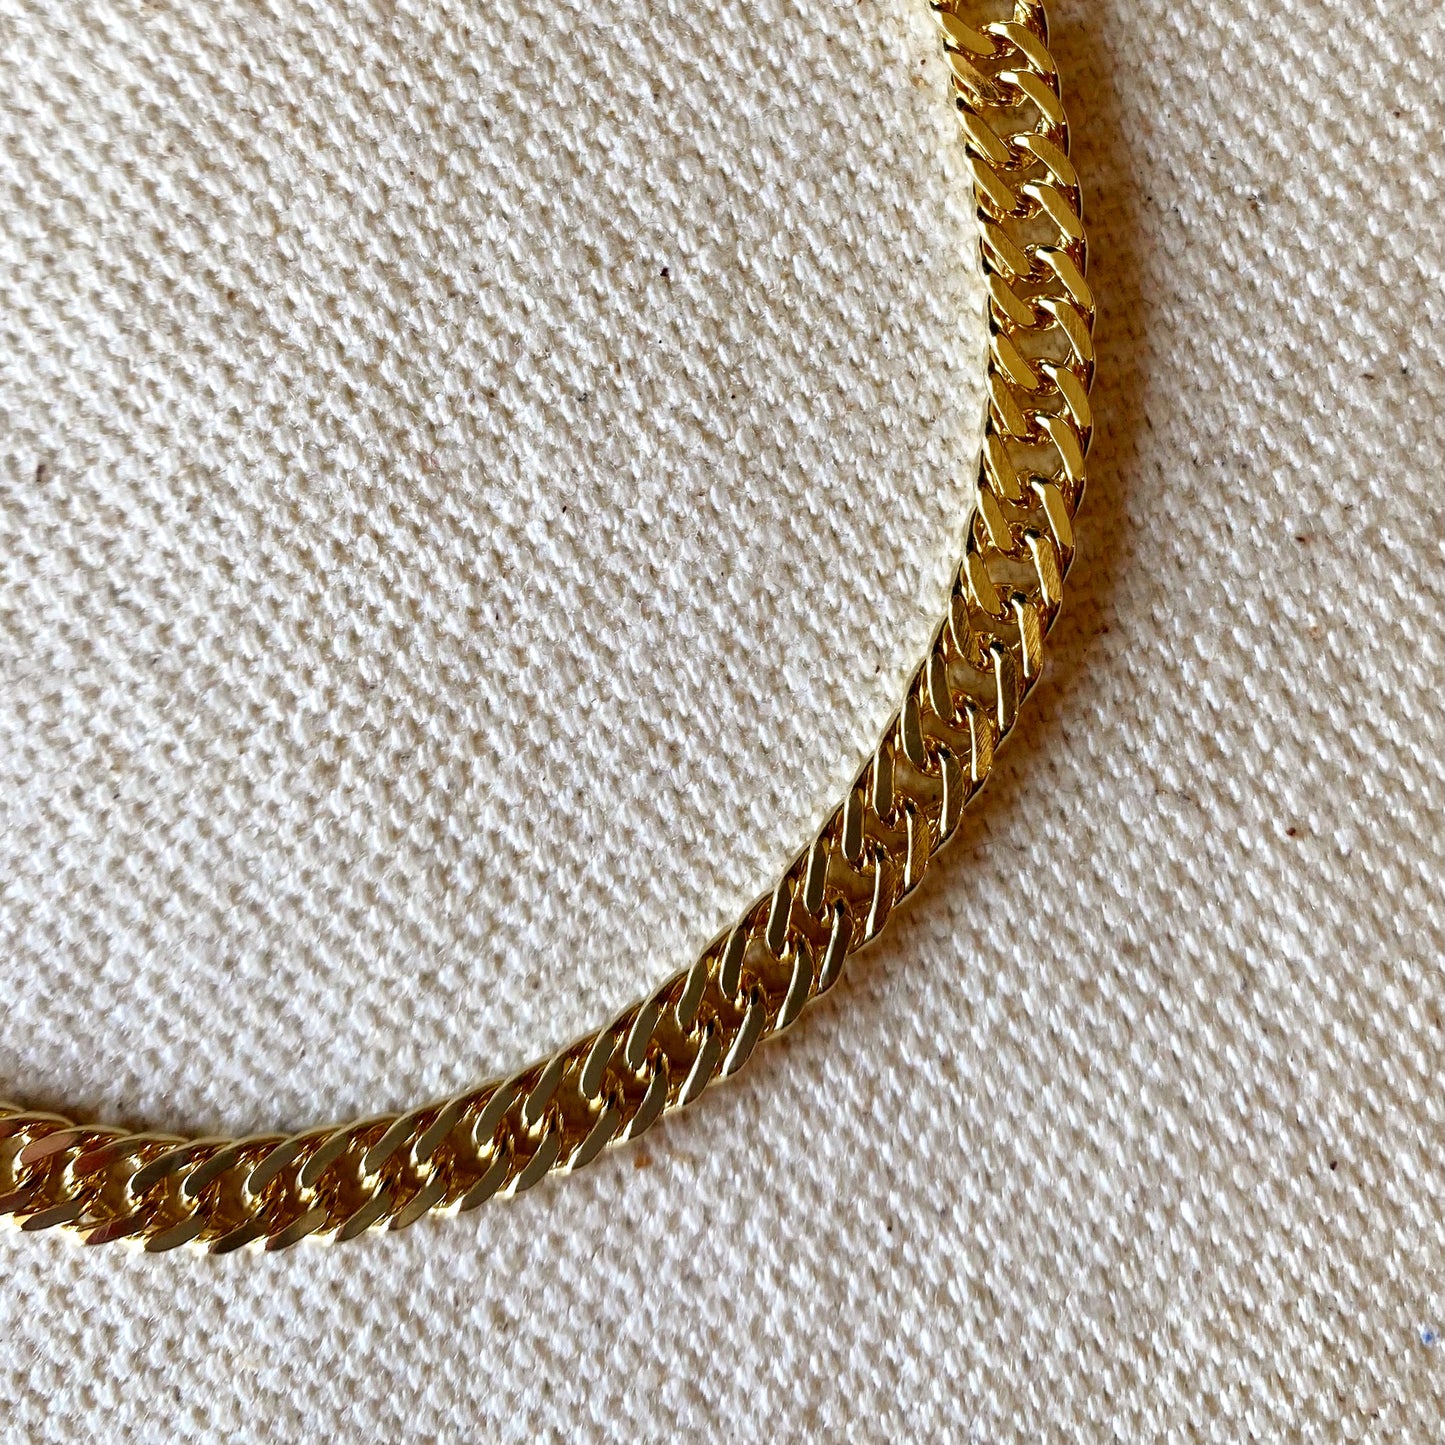 18k Gold Filled Double Cuban Link or Curb Chain 4.0mm Thickness Anklet